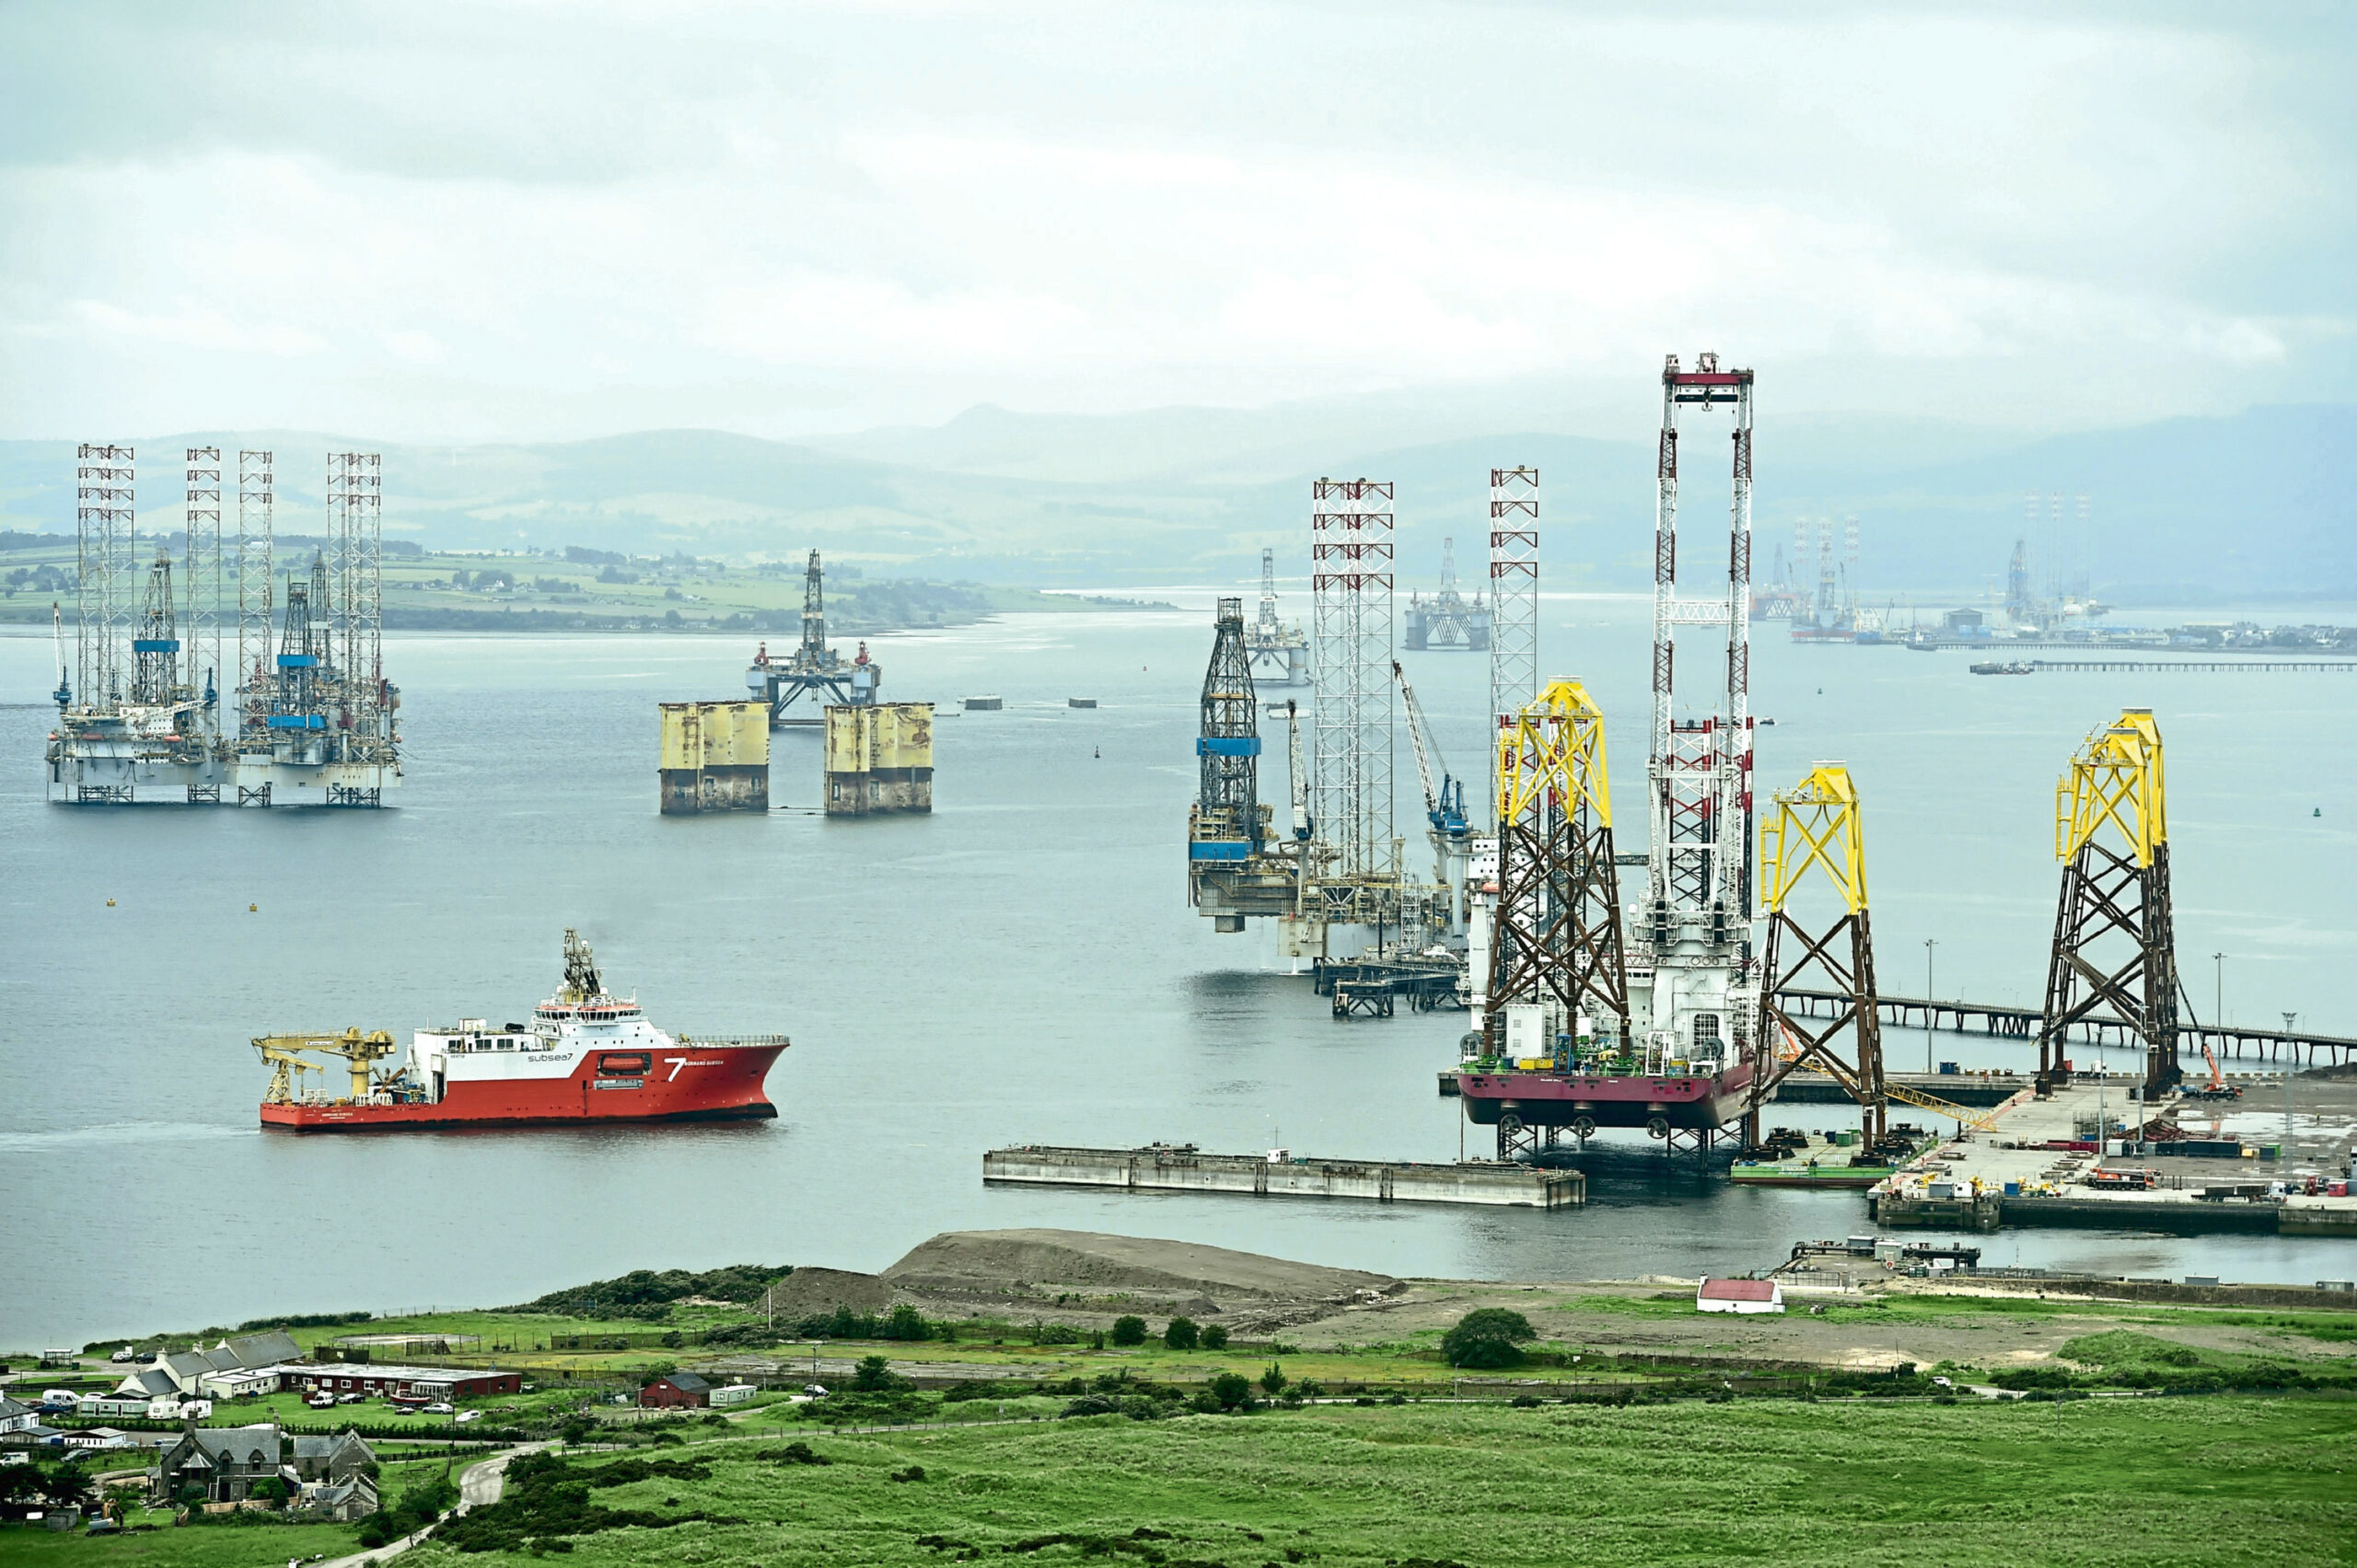 The Highlands alread plays a key role in energy production